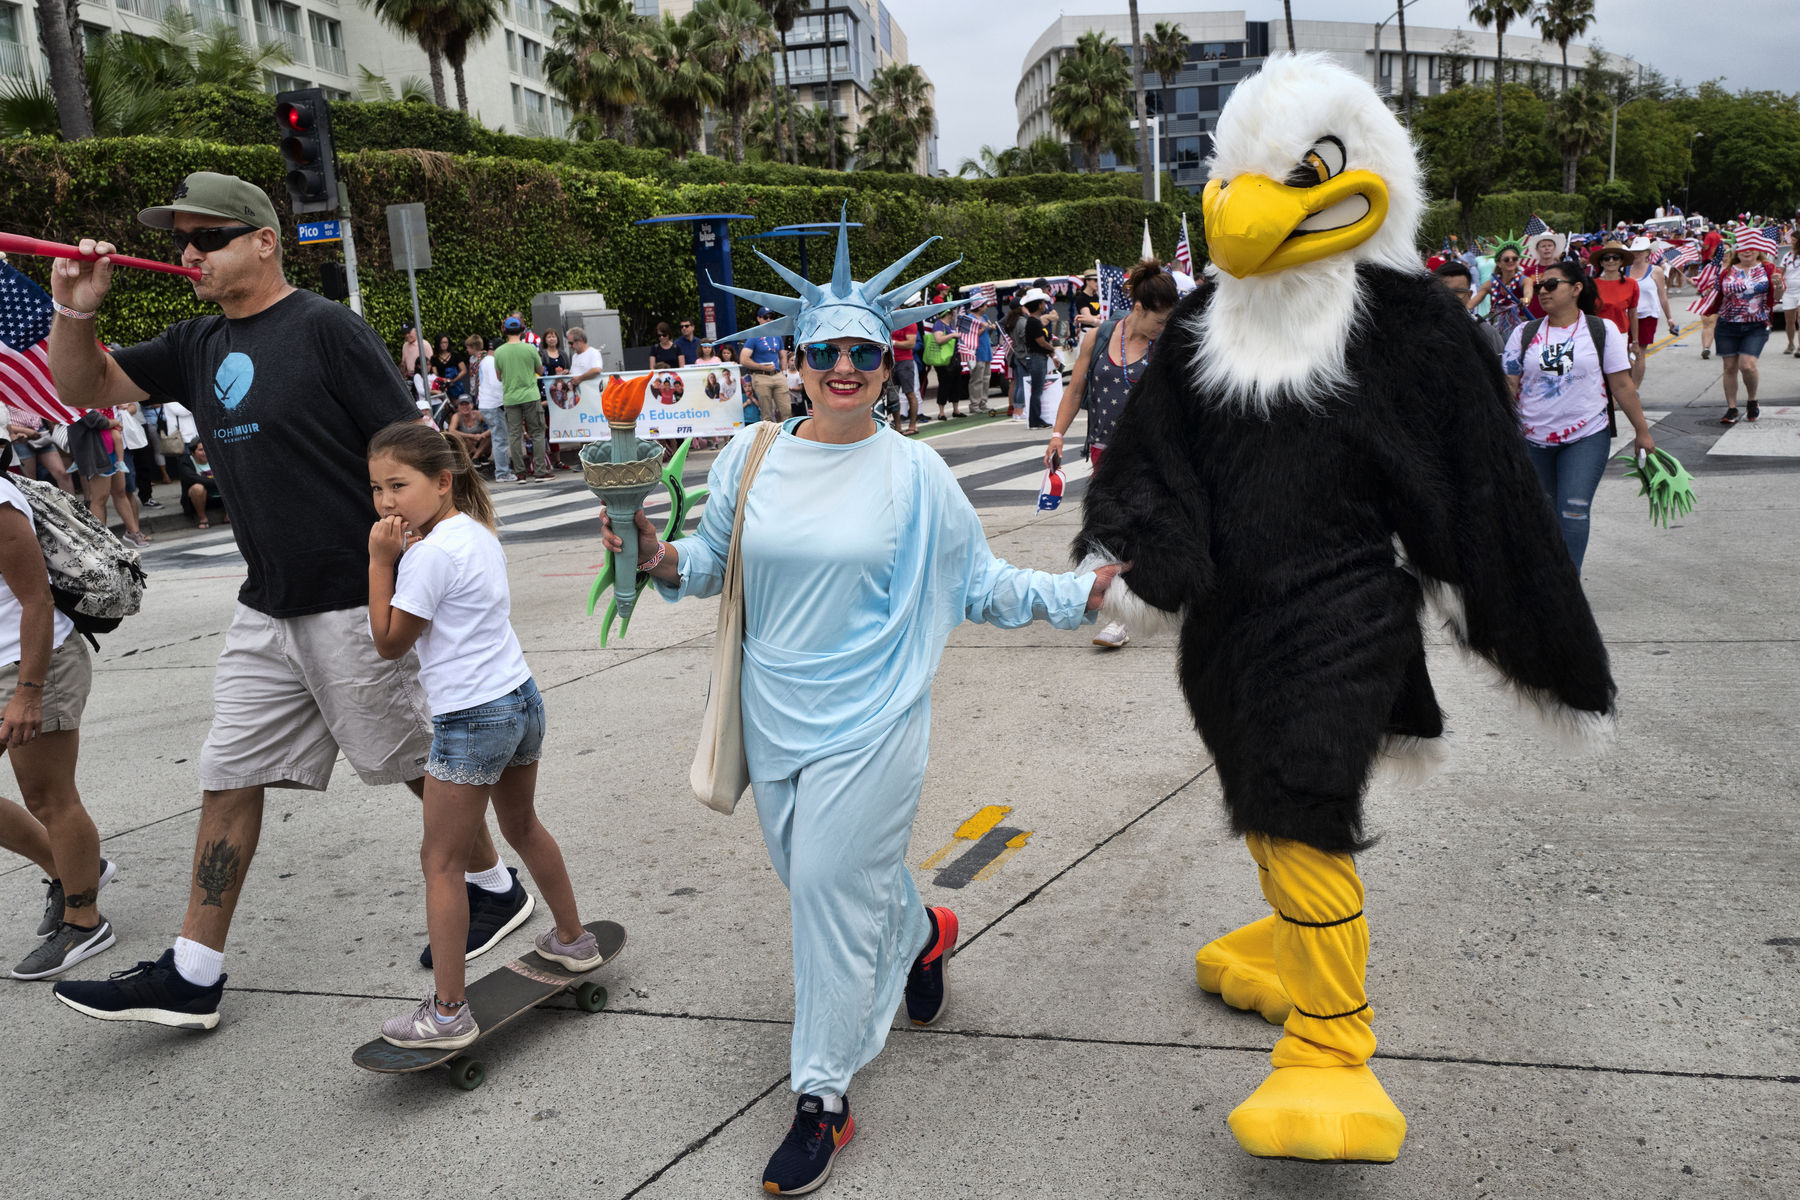 Dressed as Lady Liberty and the American Eagle participants parade down a street while joining in on the festivities at the Santa Monica Fourth of July parade, Thursday July 4, 2019 in Santa Monica, Calif. (AP Photo/Richard Vogel)